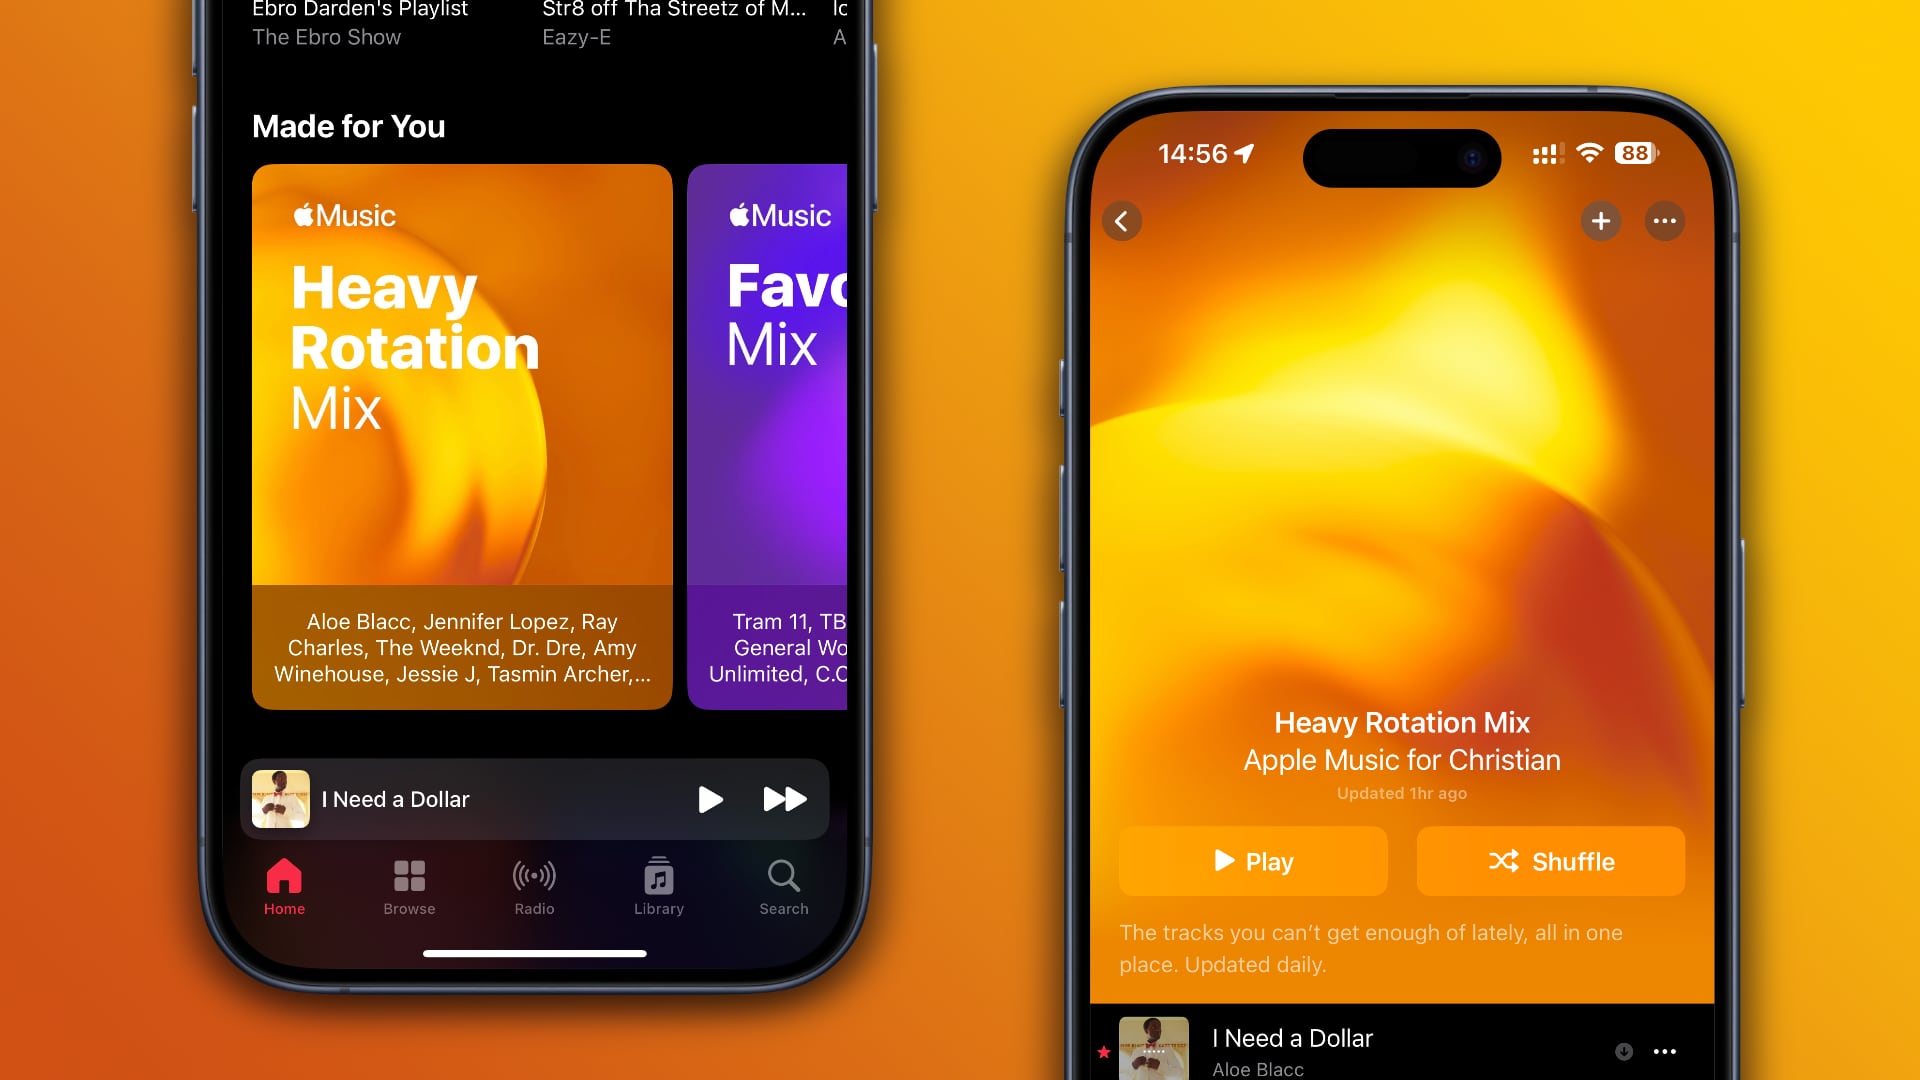 “Heavy Rotation Mix” is Apple Music’s first personalized playlist updated daily